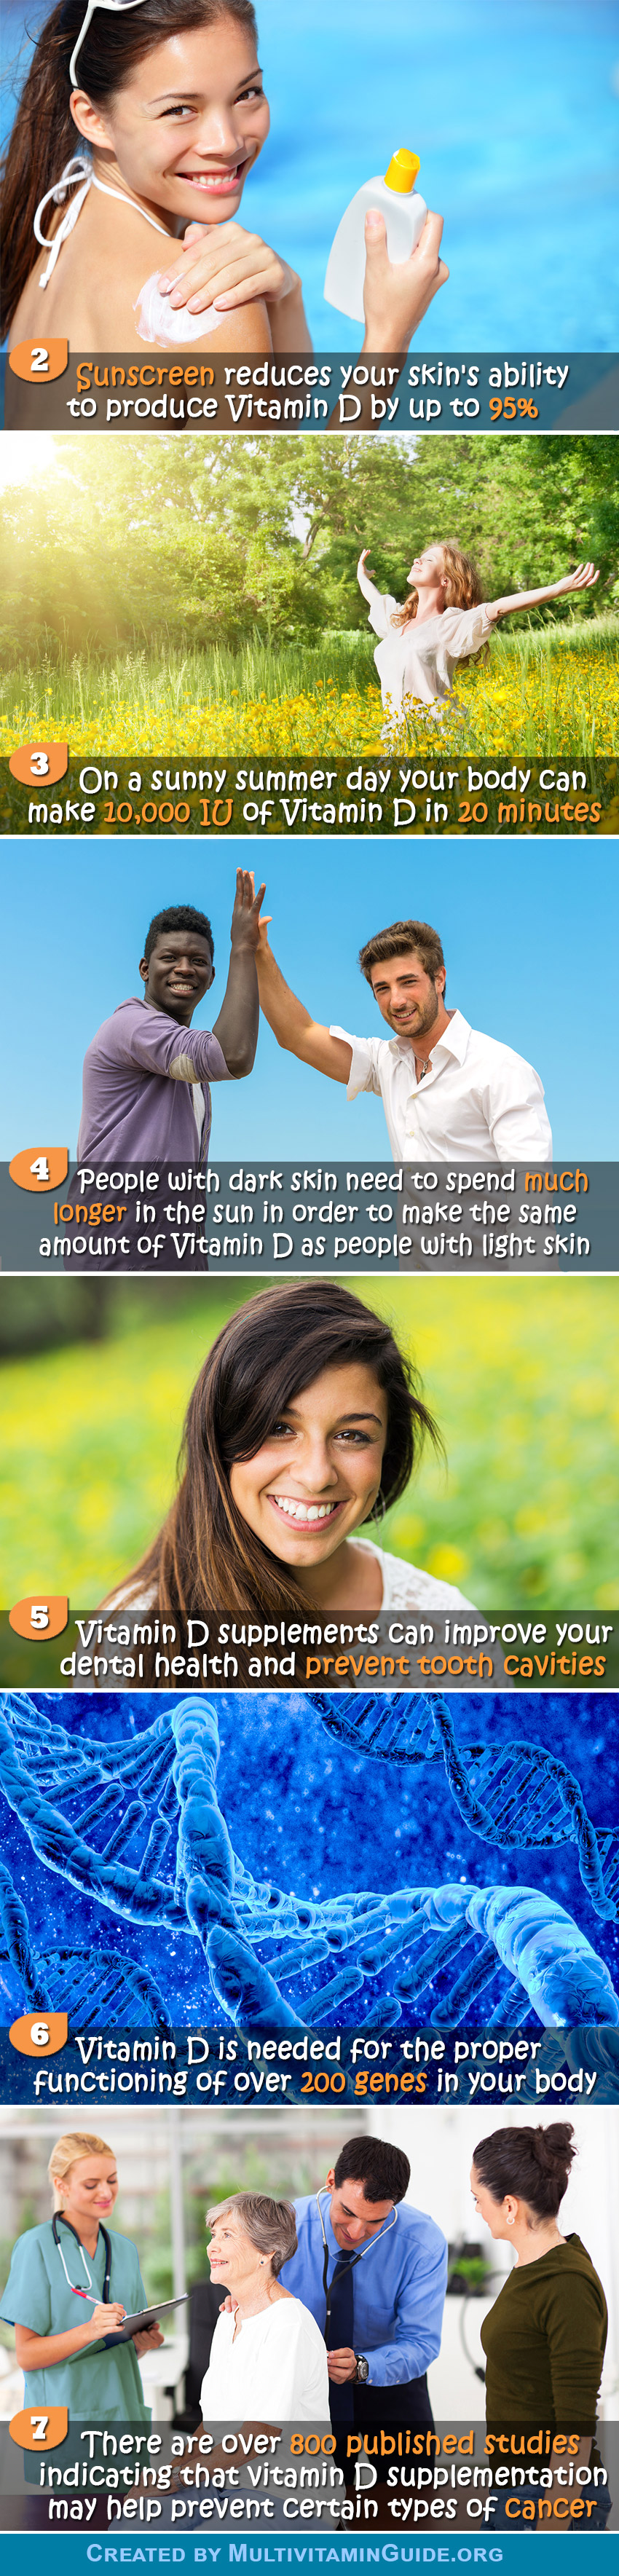 2) Sunscreen reduces your skin's ability to produce Vitamin D by up to 95%. 3) On a sunny summer day your body can make 10,000 IU of Vitamin D in 20 minutes. 4) People with dark skin need to spend much longer in the sun in order to make the same amount of Vitamin D as people with light skin. 5) Vitamin D supplements can improve your dental health and prevent tooth cavities. 6) Vitamin D is needed for the proper functioning of over 200 genes in your body. 7) There are over 800 published studies indicating that vitamin D supplementation may help prevent certain types of cancer.